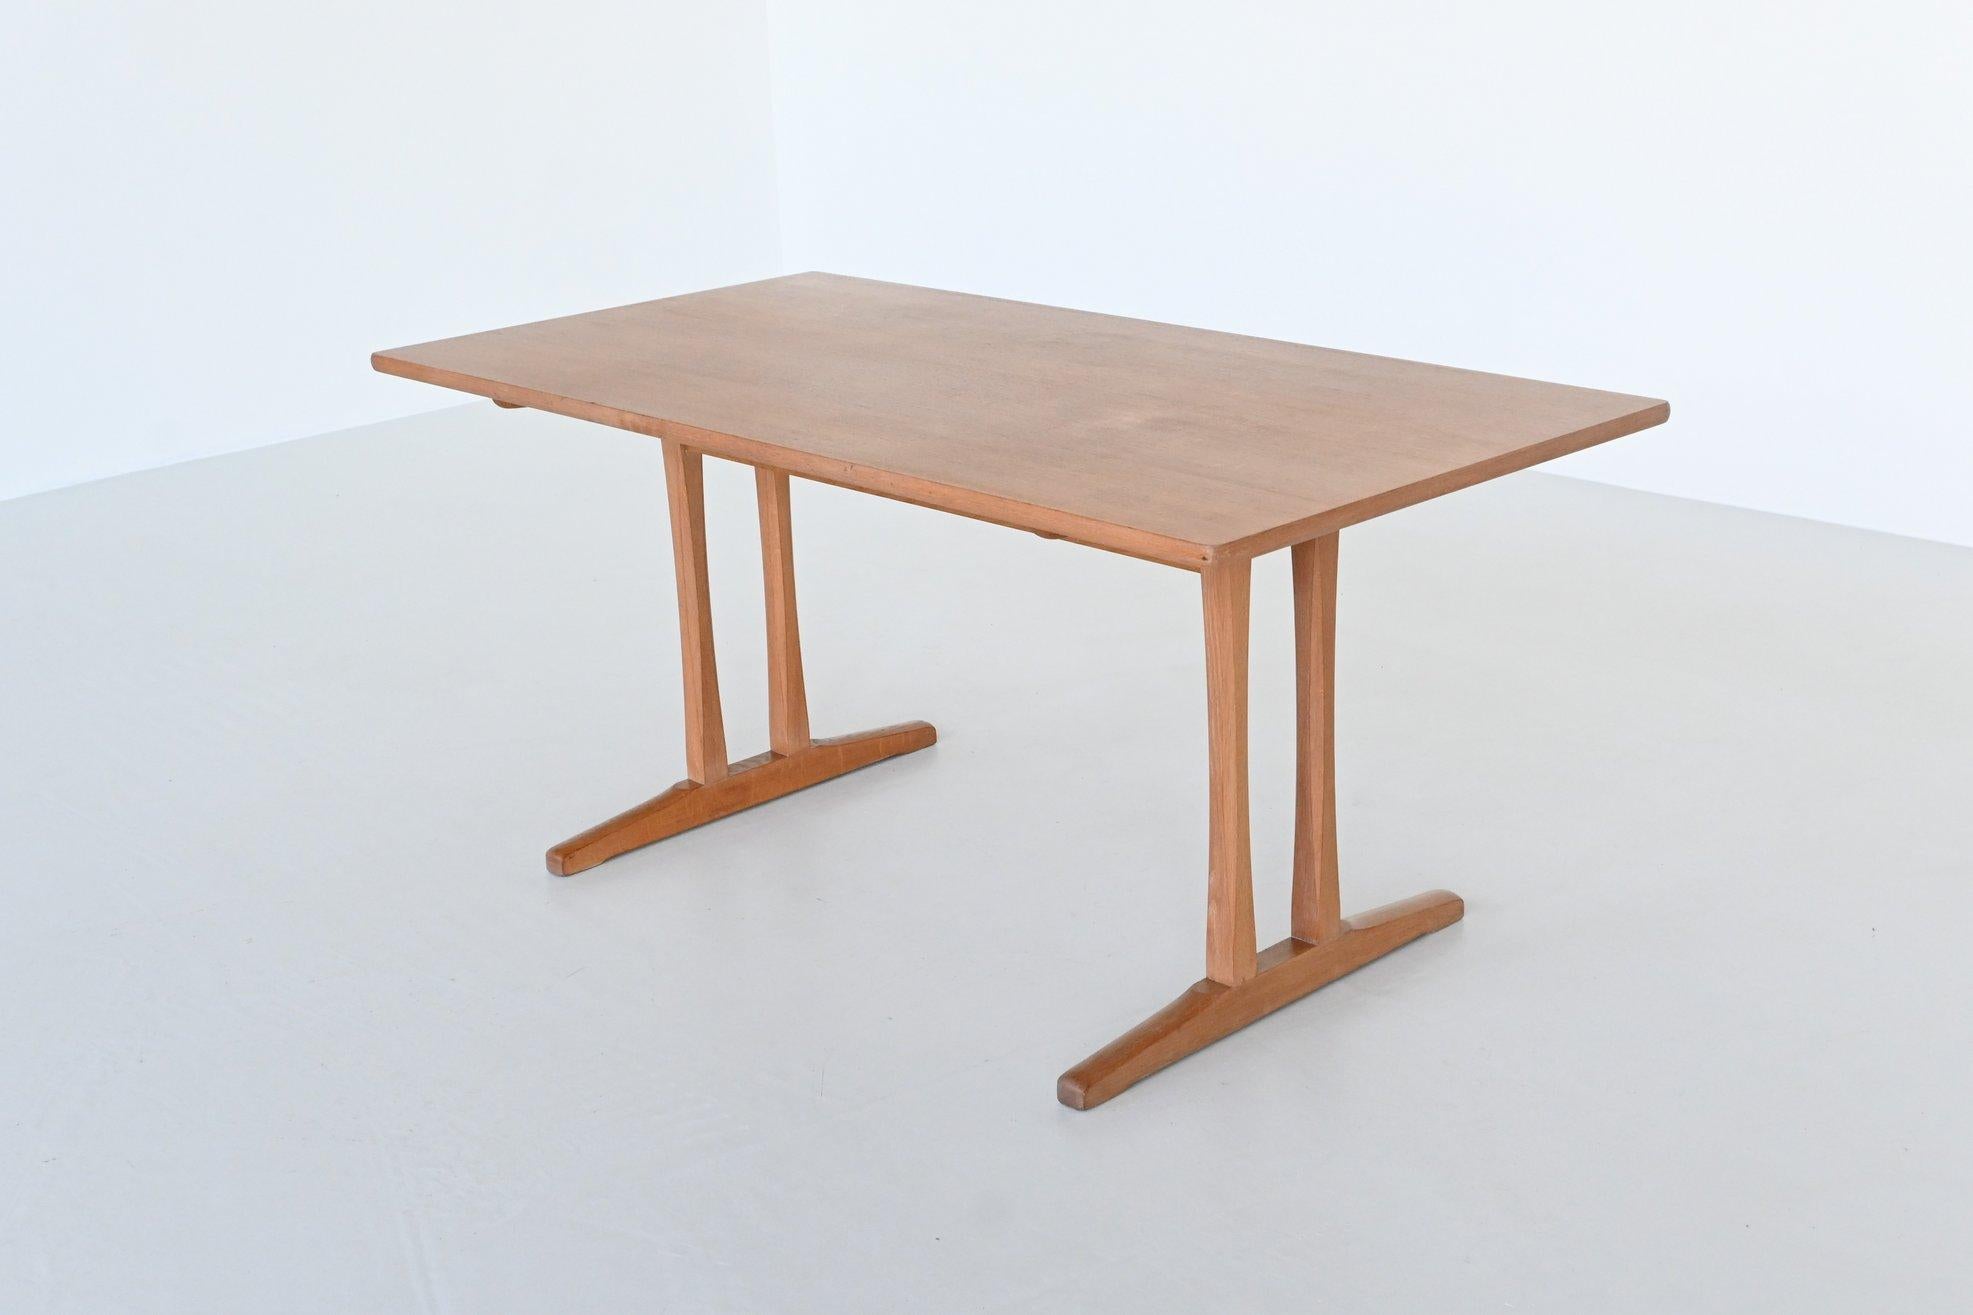 Very nice dining table model C18 designed by Børge Mogensen for Fredericia Furniture, Denmark, 1947. This table is designed in 1947 and produced in 1967. It’s inspired by traditional shaker tables. The table is made of soaked oak, it features a